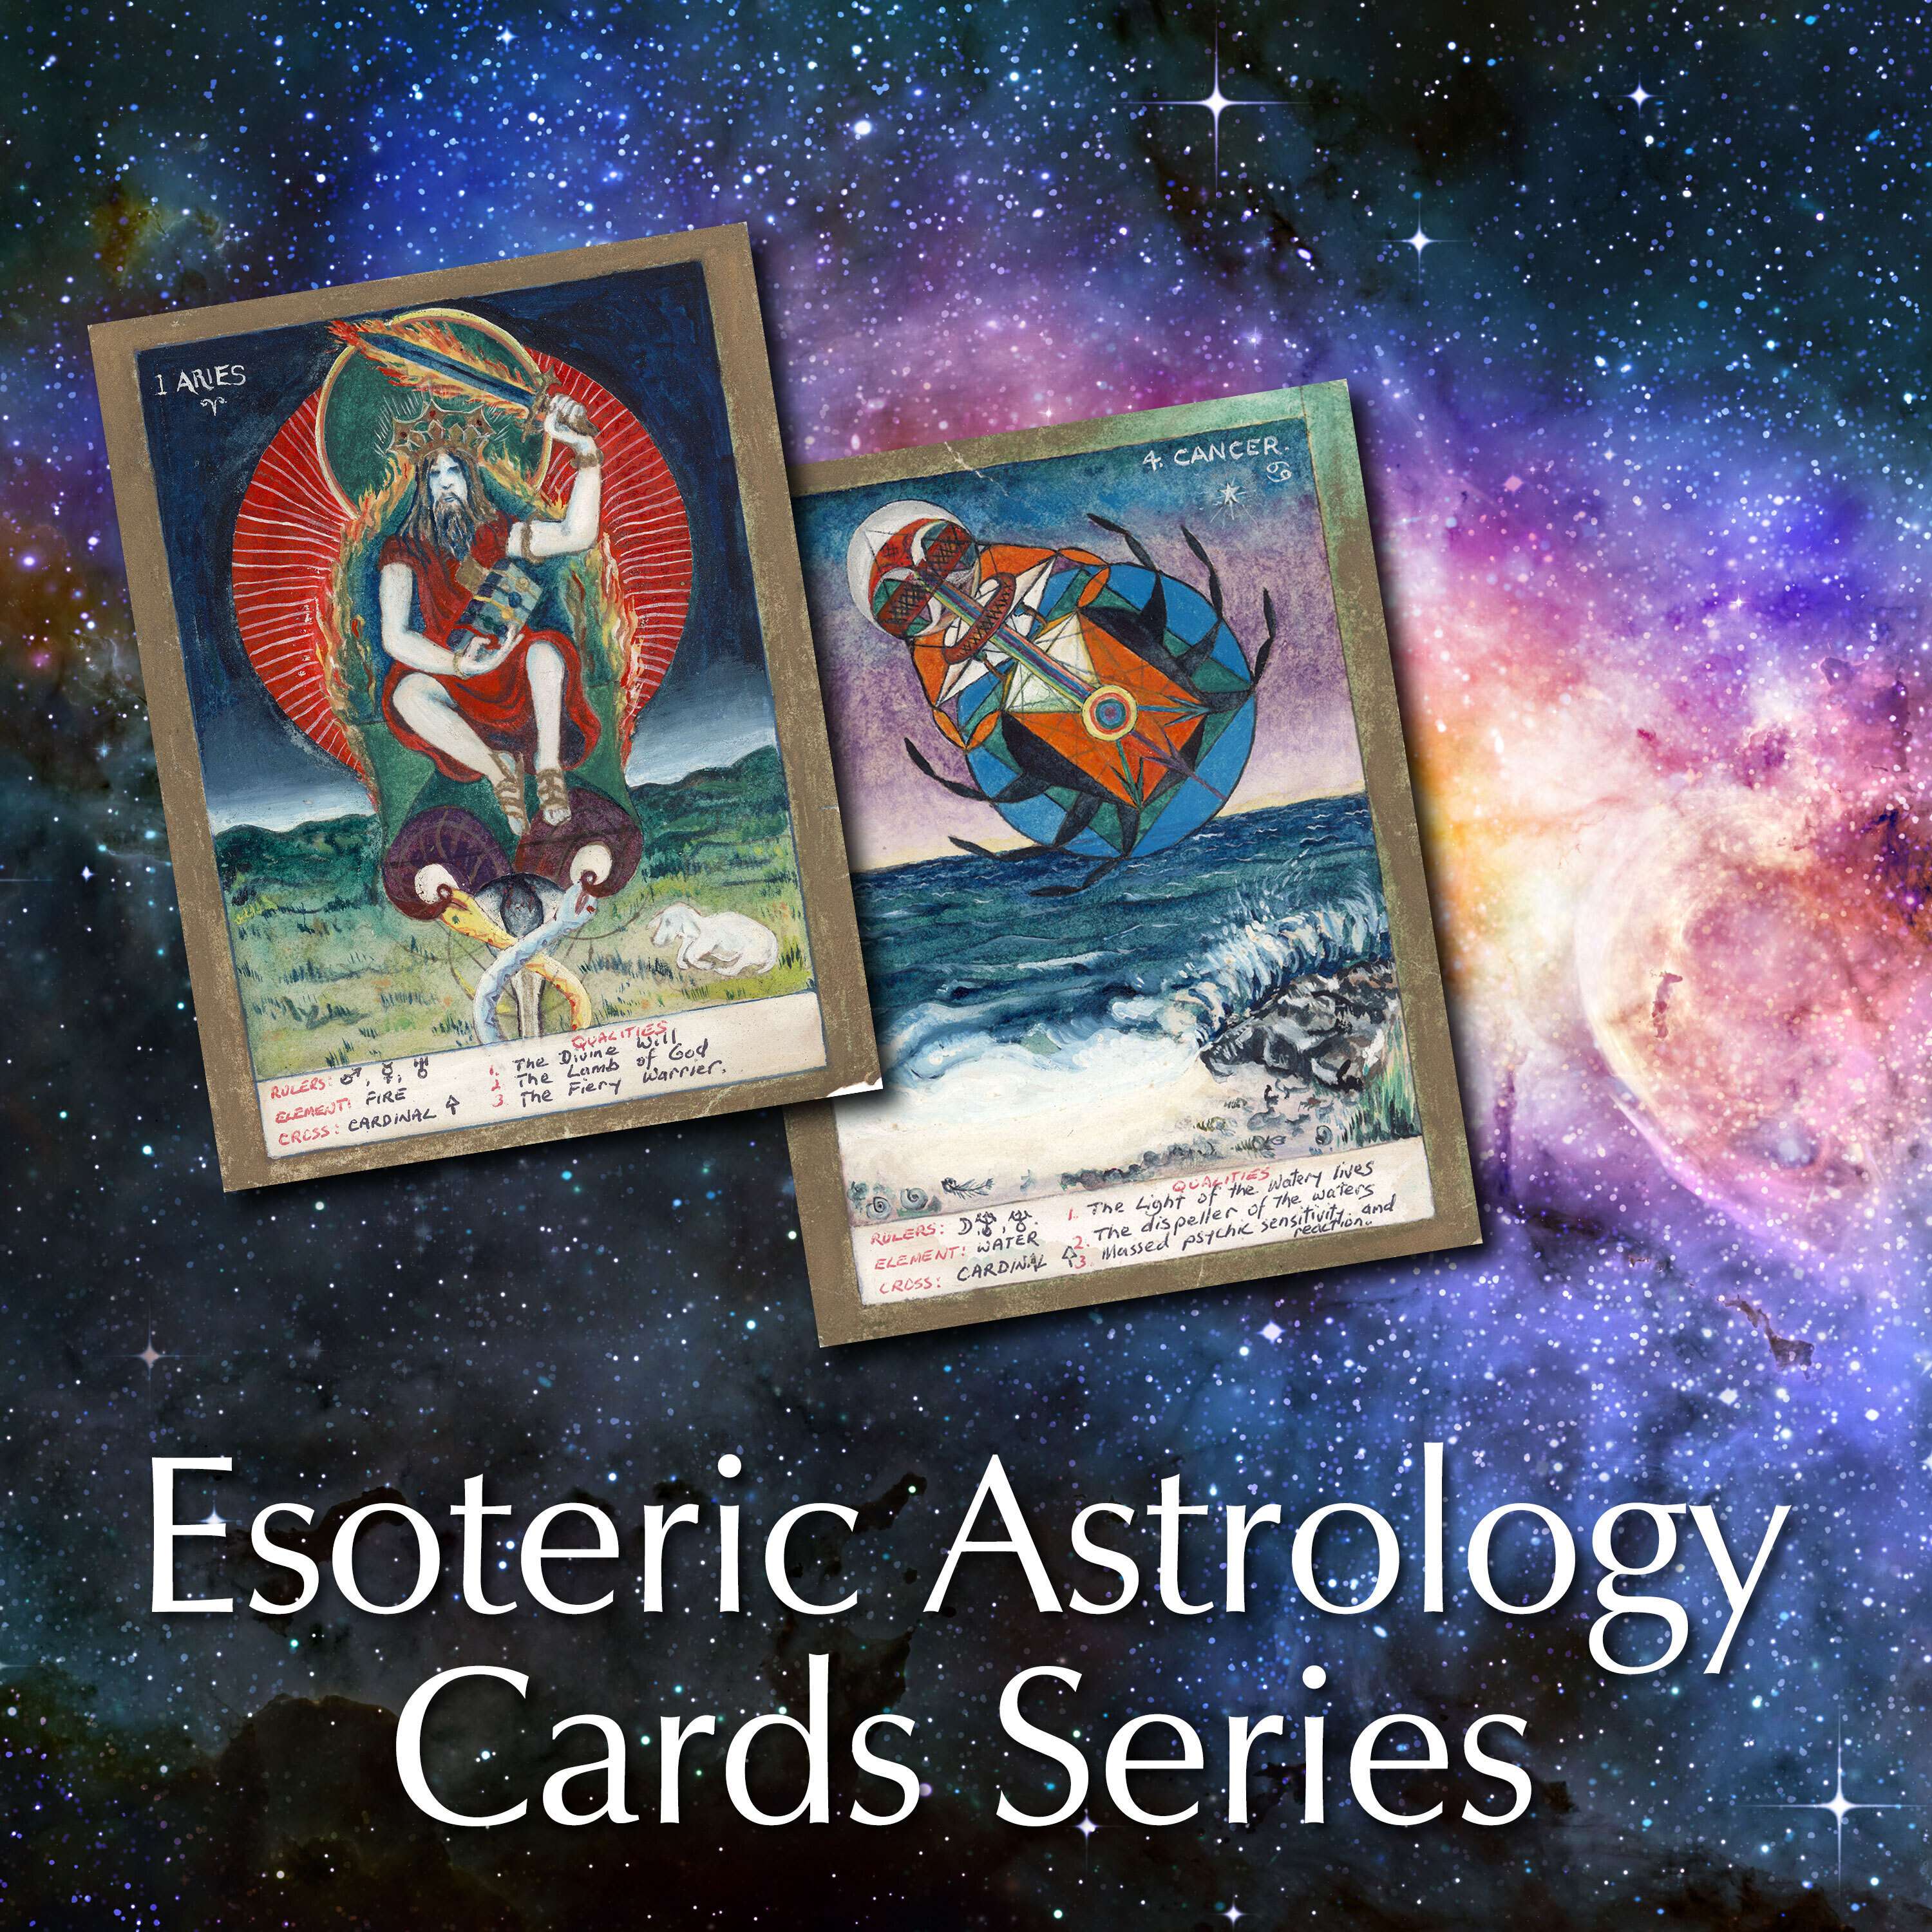 Esoteric Astrology Cards